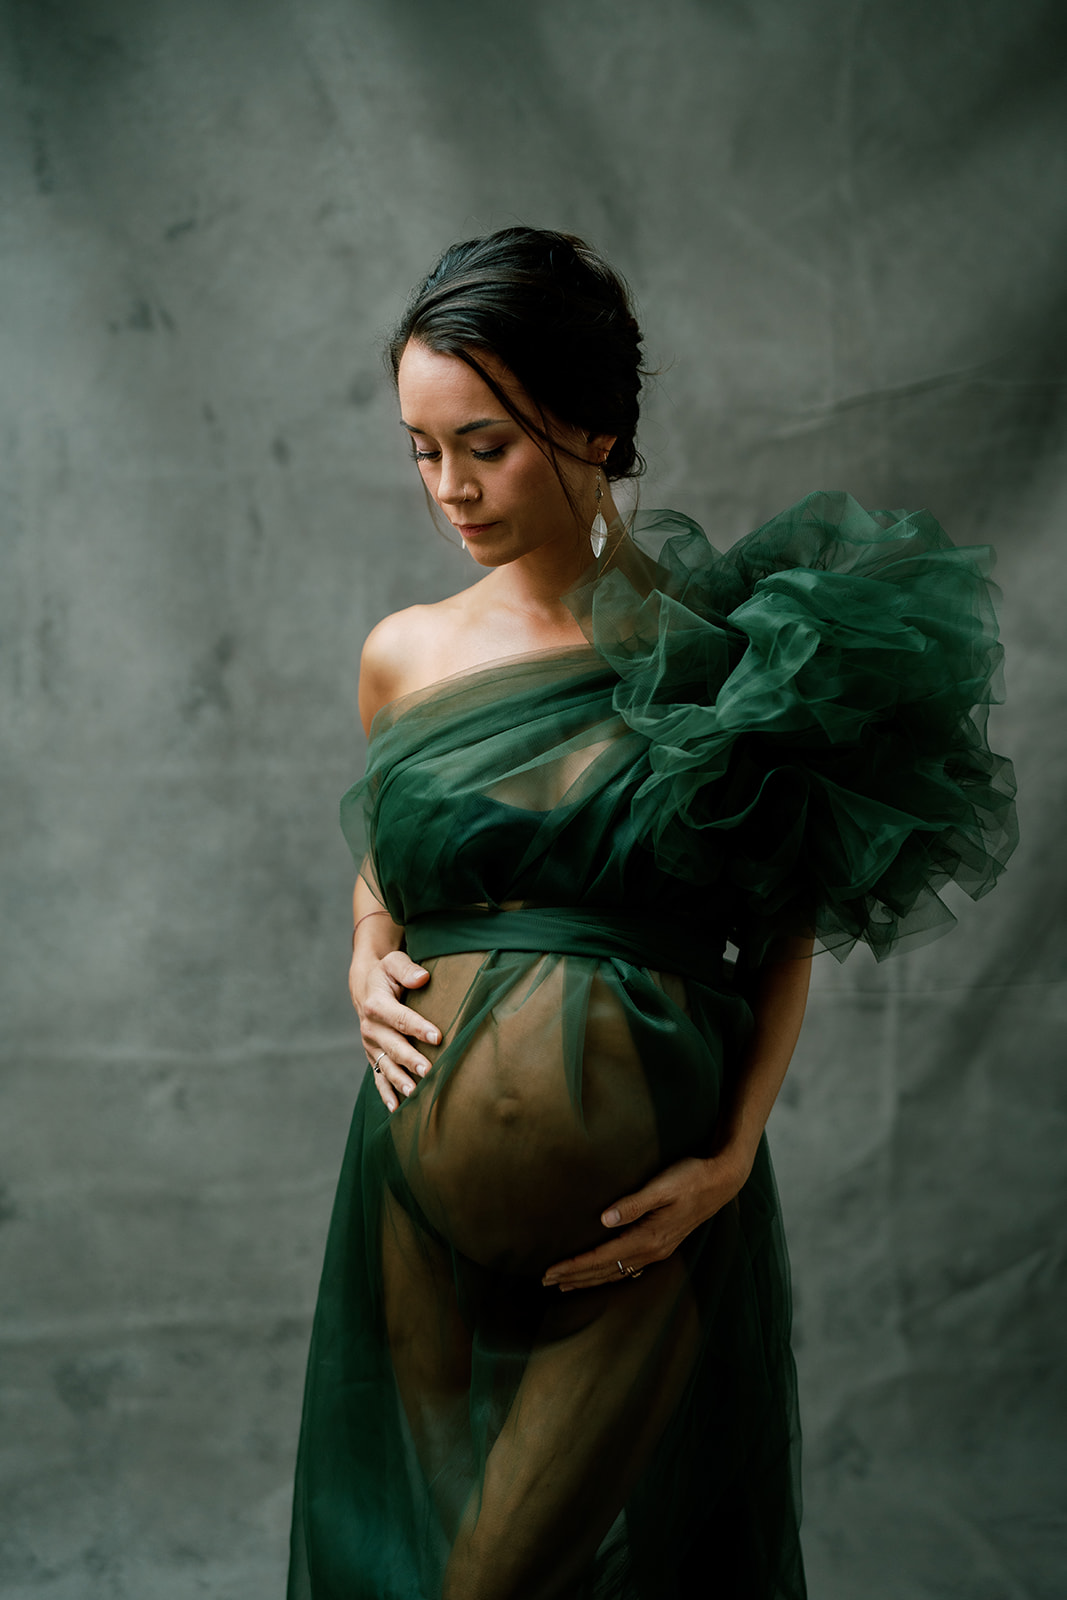 A pregnant woman in a green gown looking down posing for a photo in her maternity session.